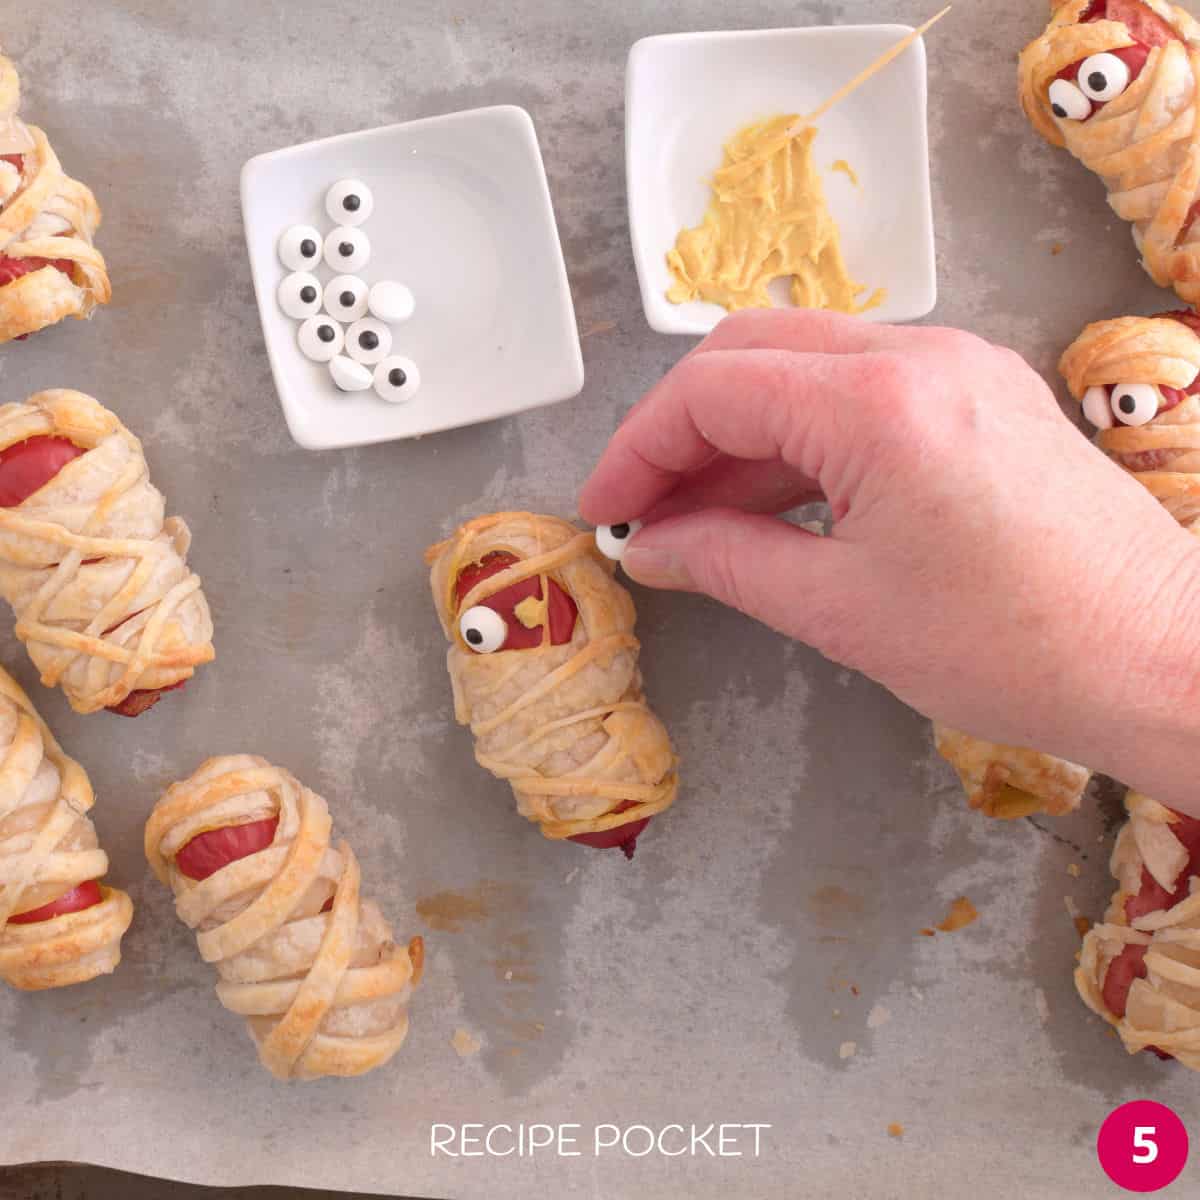 Candy eyes being attached to hot dog mummies.